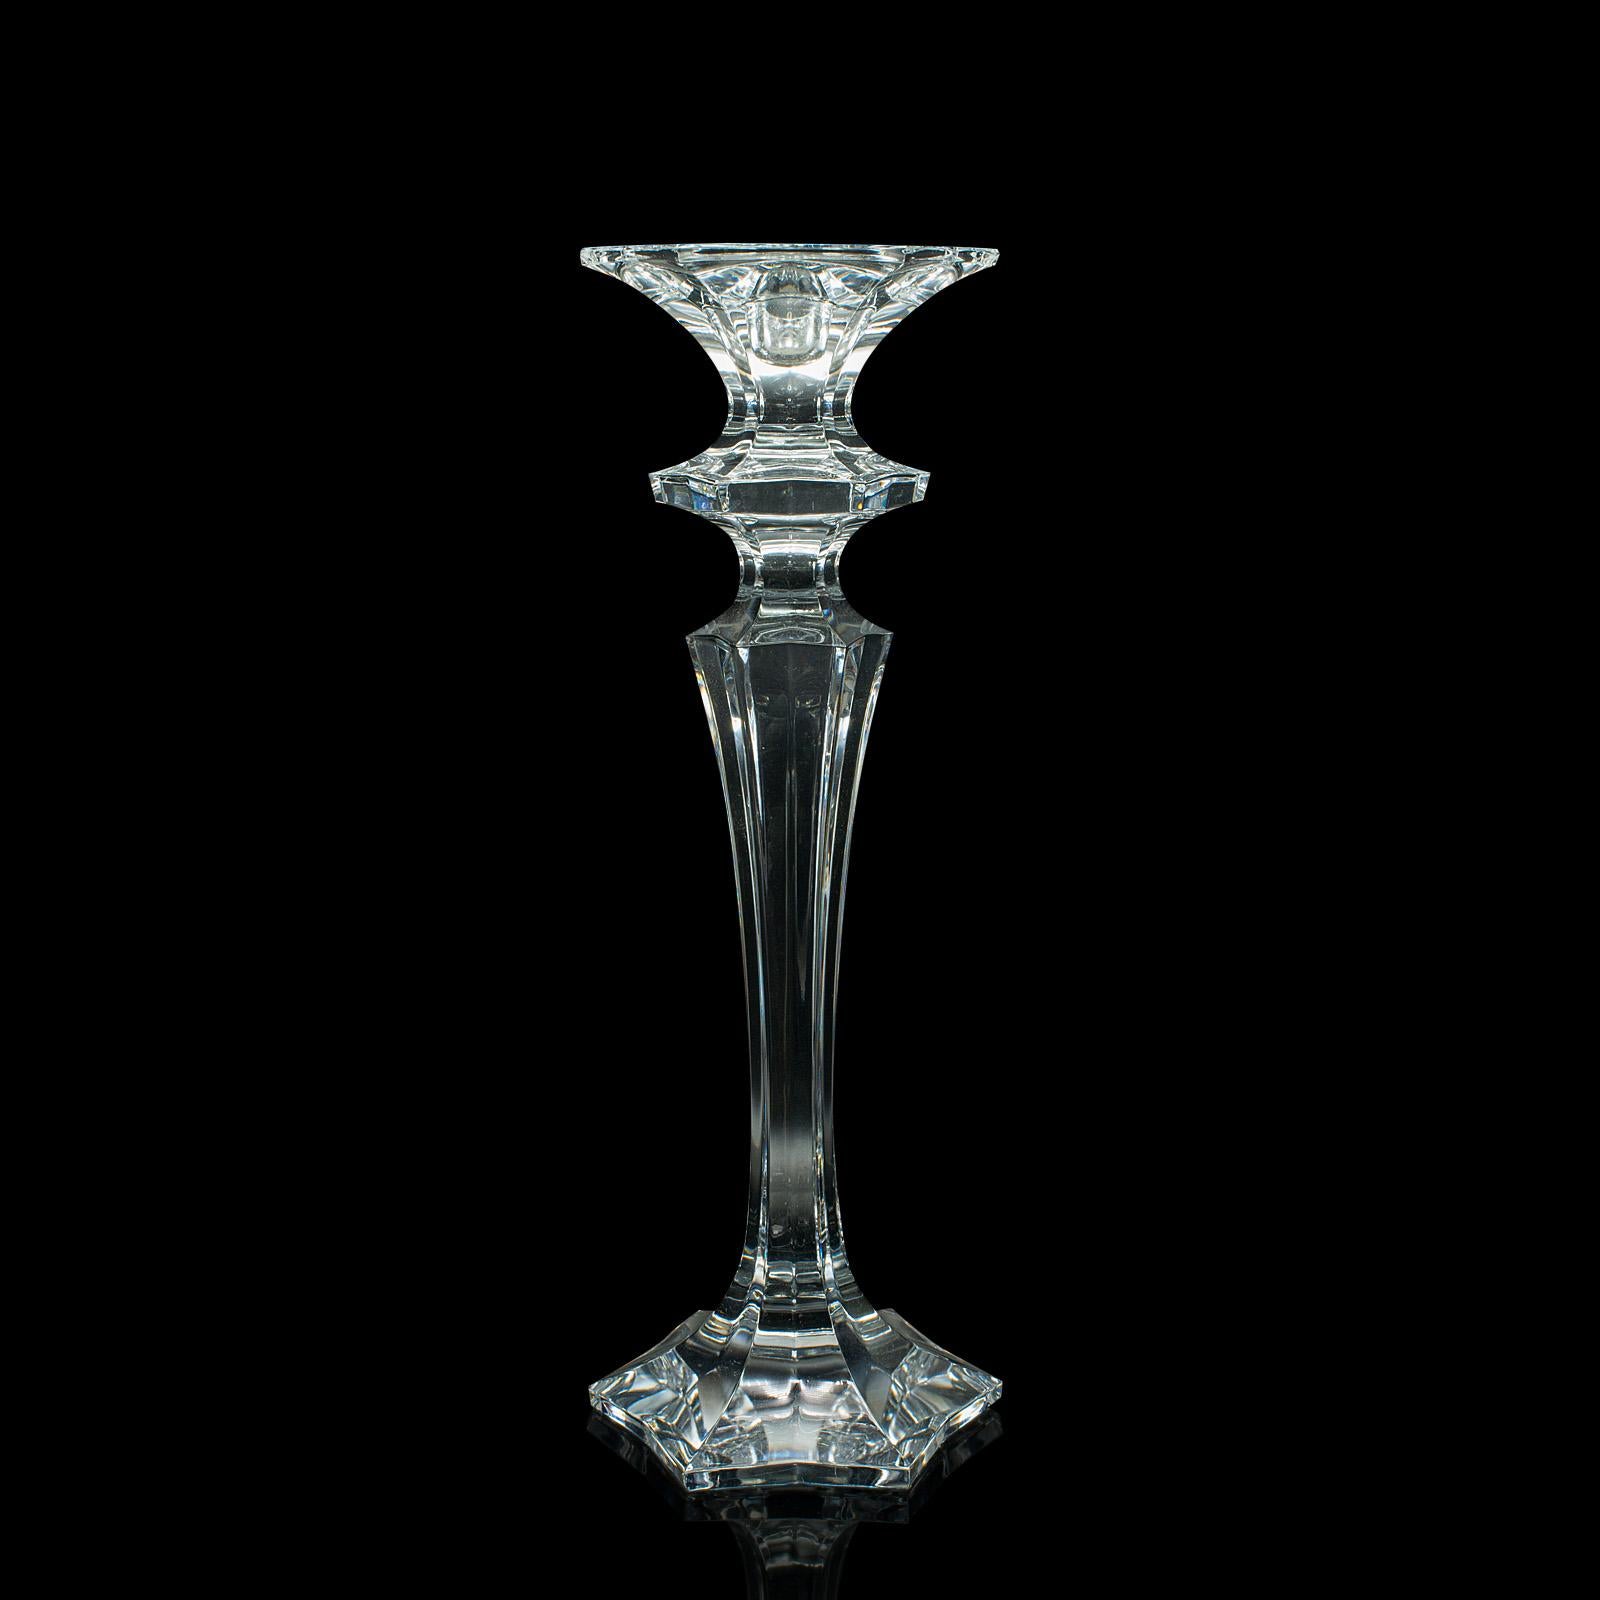 British Pair Of Vintage Candlesticks, English, Glass, Decorative Candle Nozzle, C.1970 For Sale